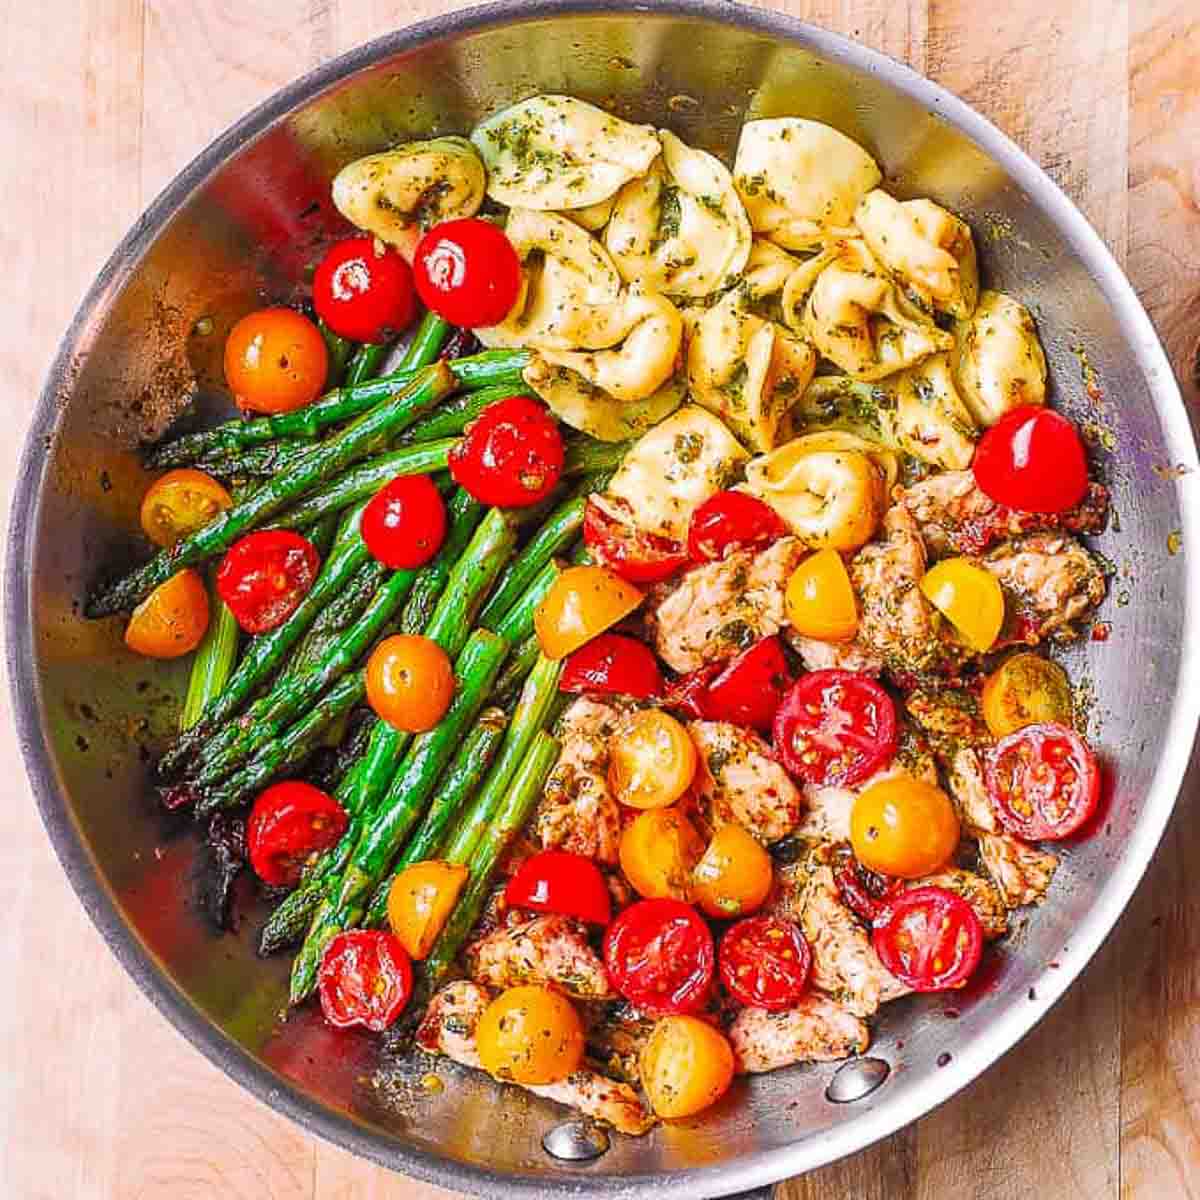 tomatoes, tortellini and asparagus in a stainless steel bowl